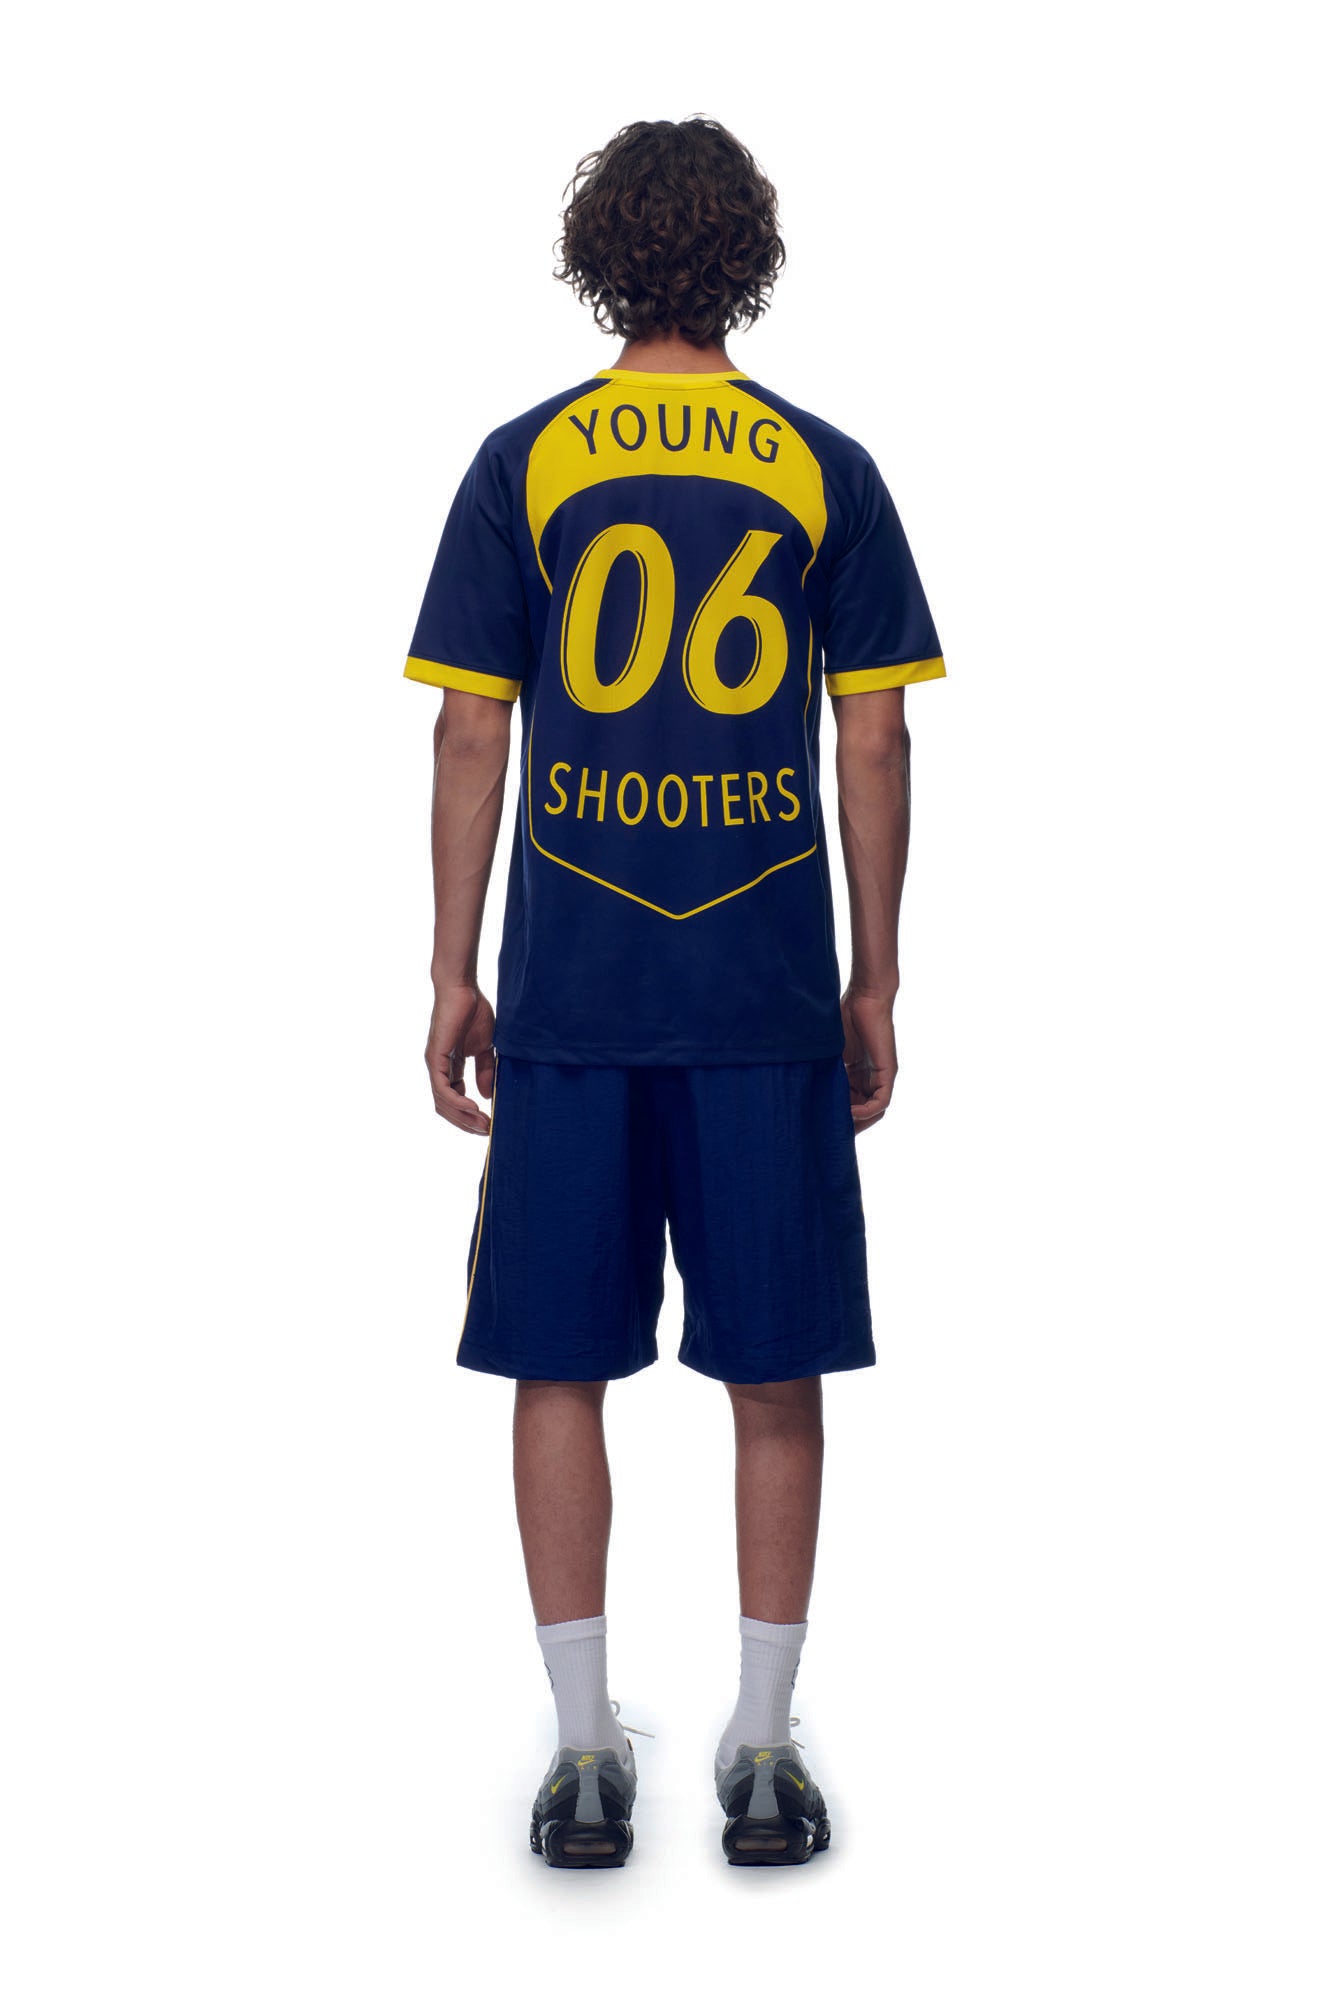 YOUNG SHOOTERS JERSEY NAVY